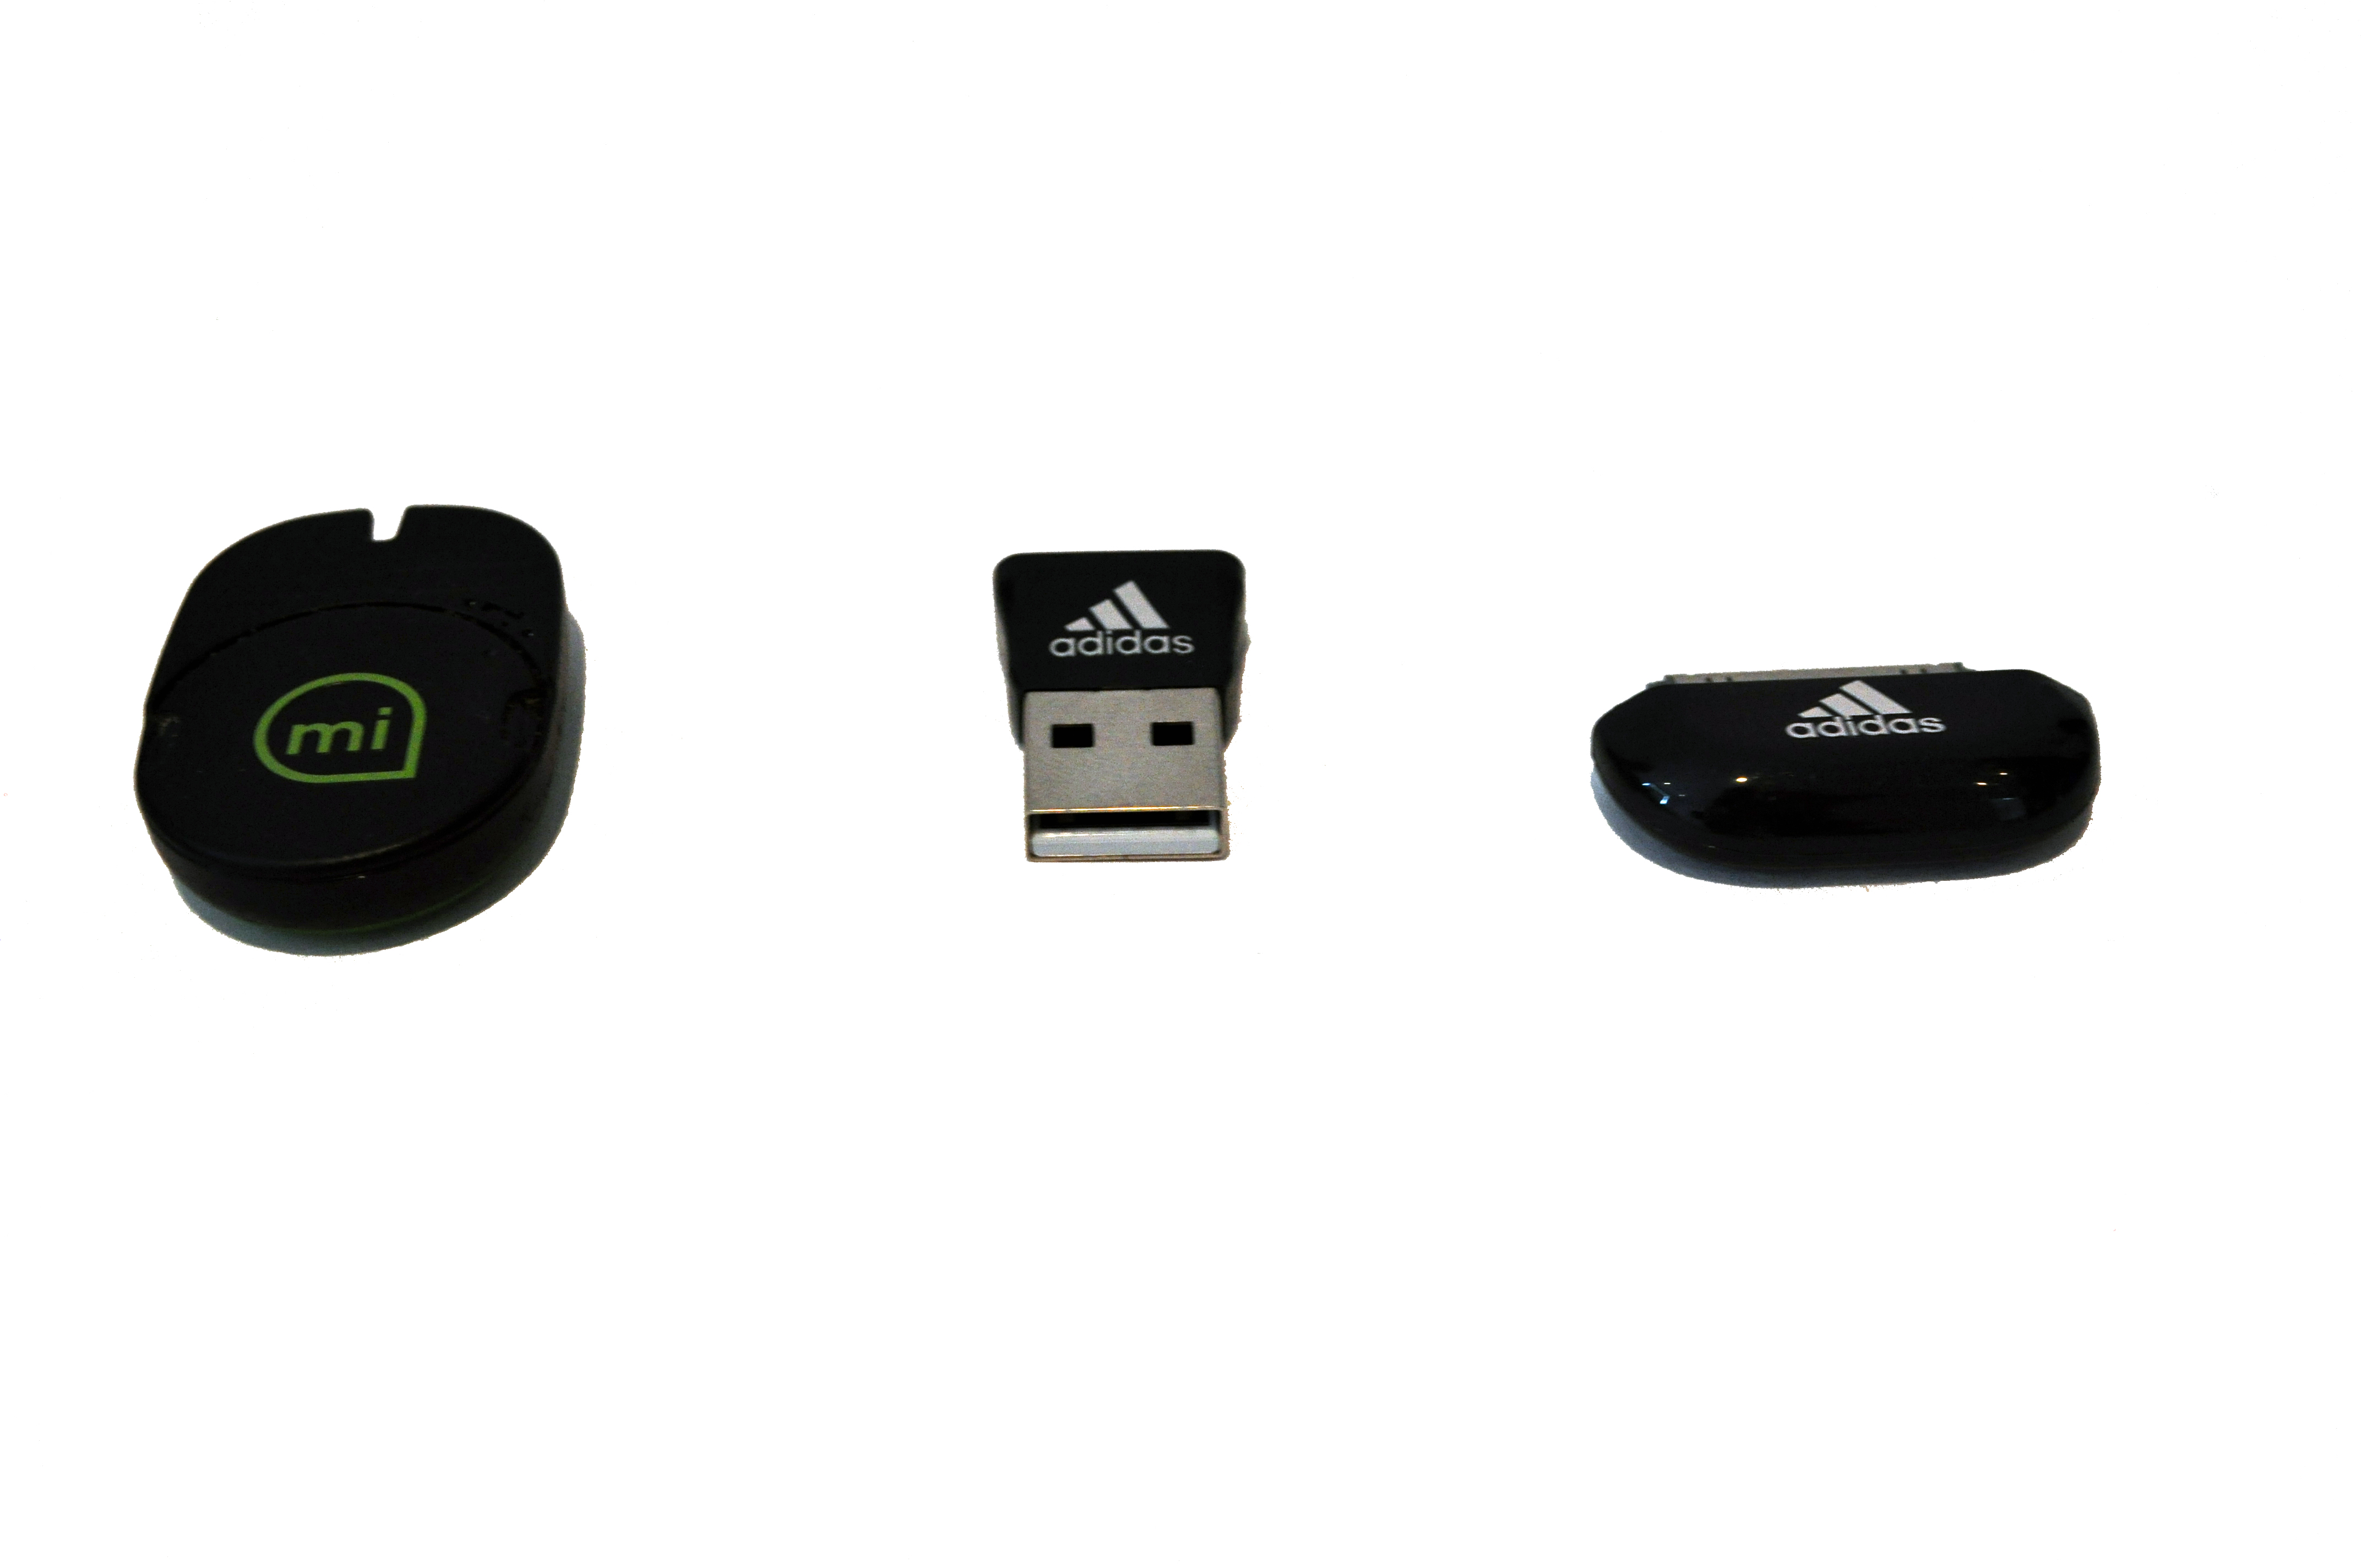 Adidas MiCoach Nike Fuel | and